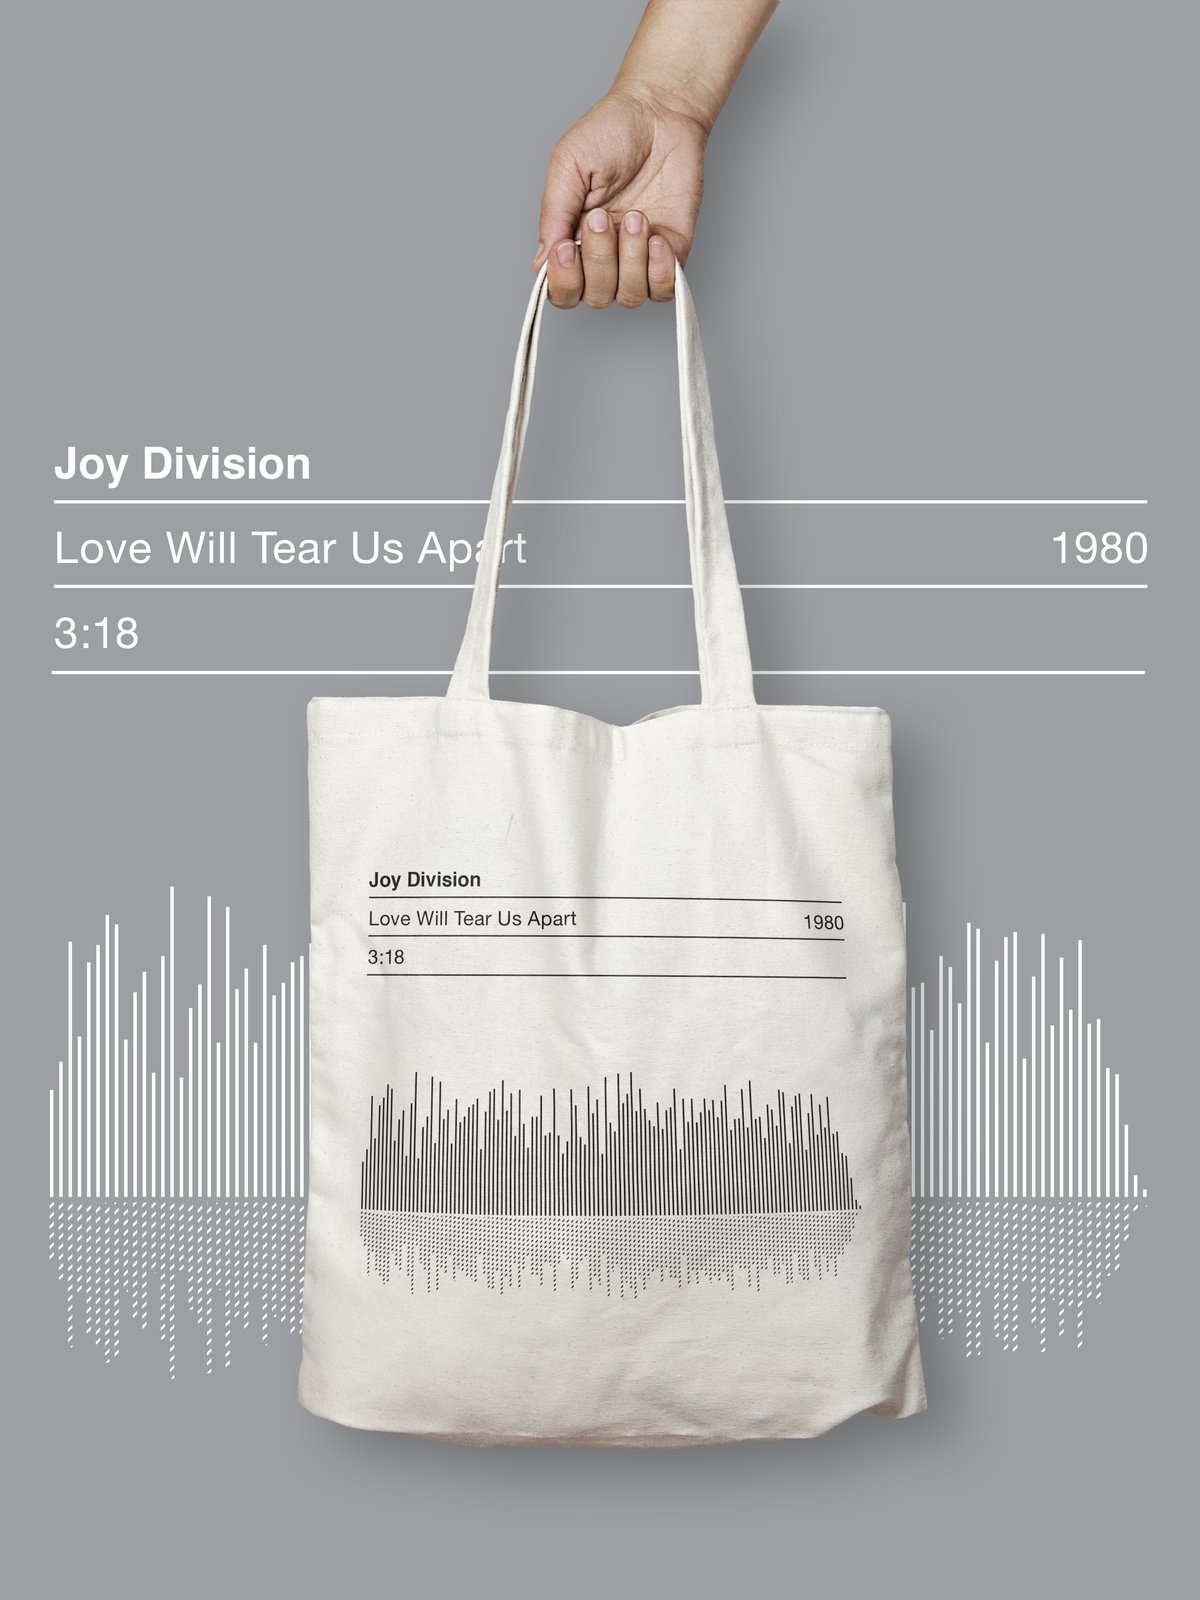 Joy Division 'Love Will Tear Us Apart' Song Soundwave Graphic